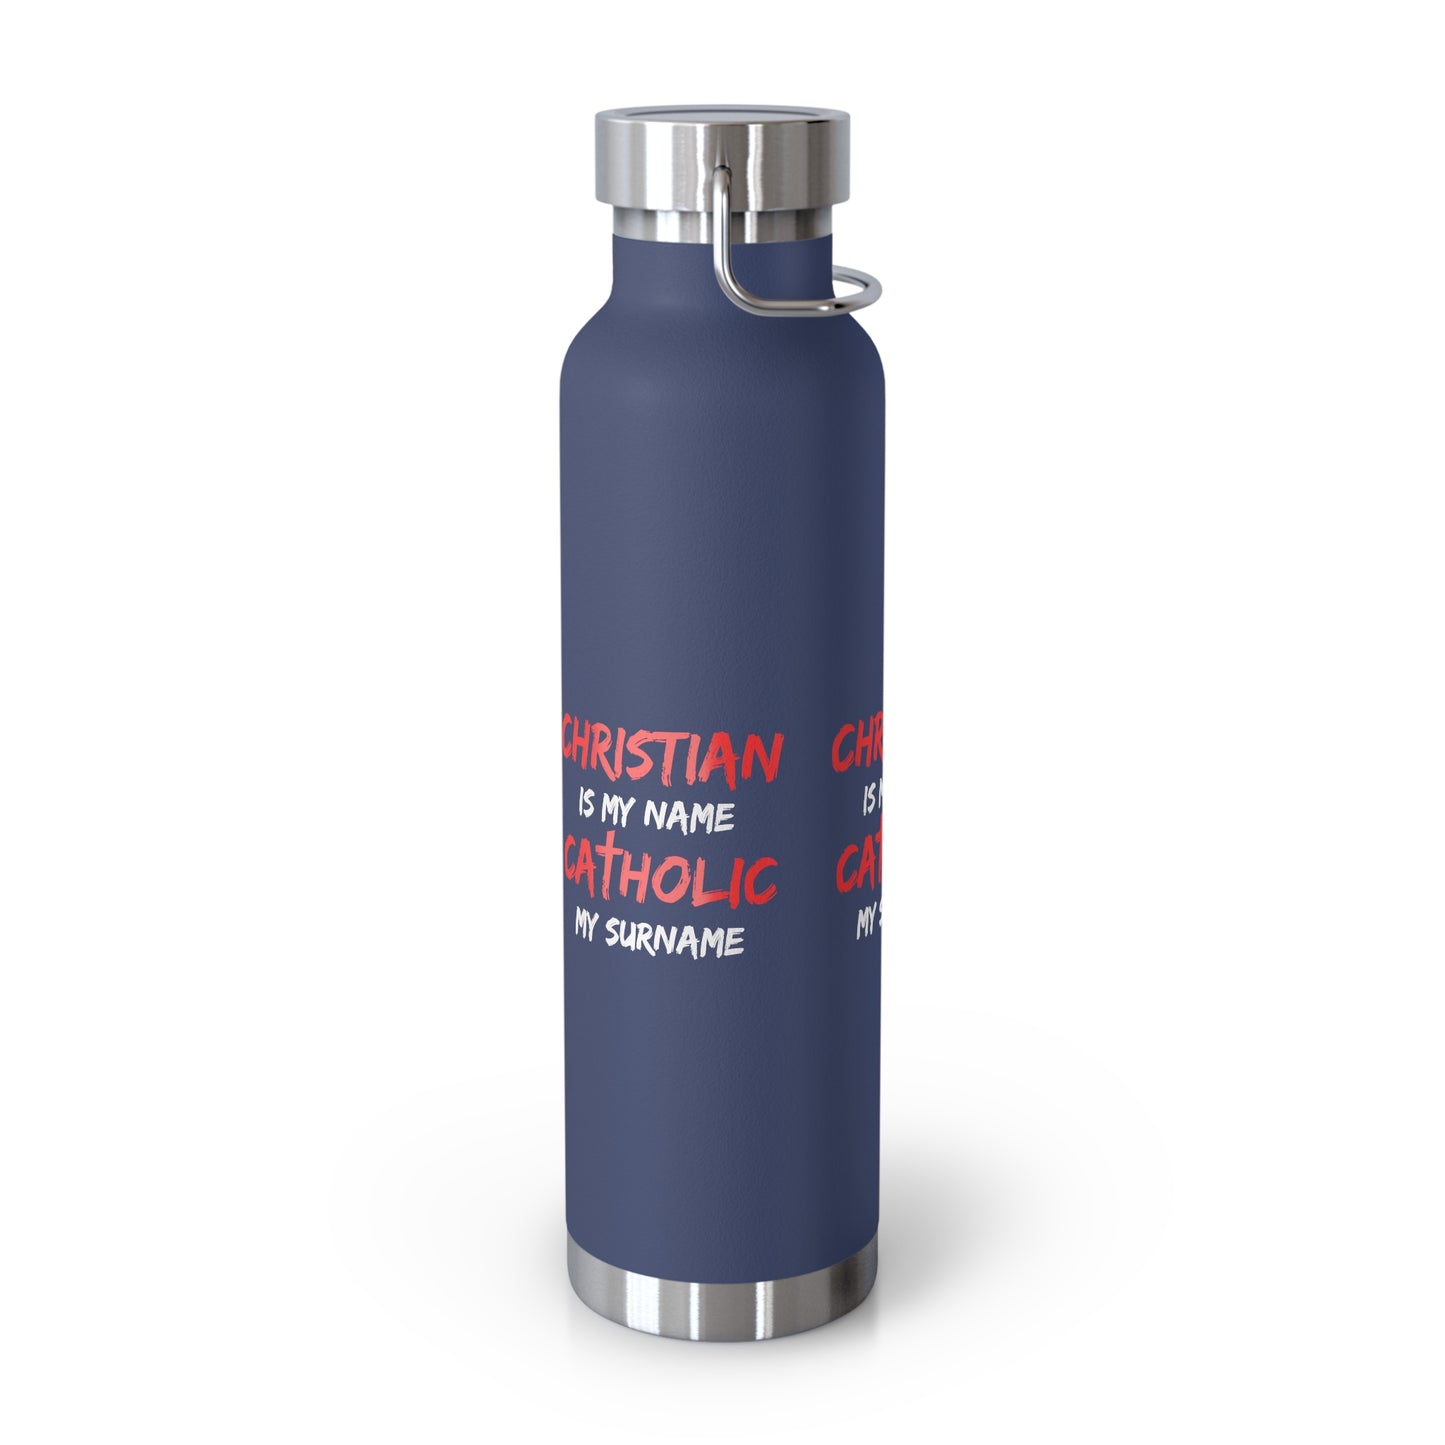 Christian is my Name, Catholic my Surname Copper Vacuum Insulated Bottle, 22oz